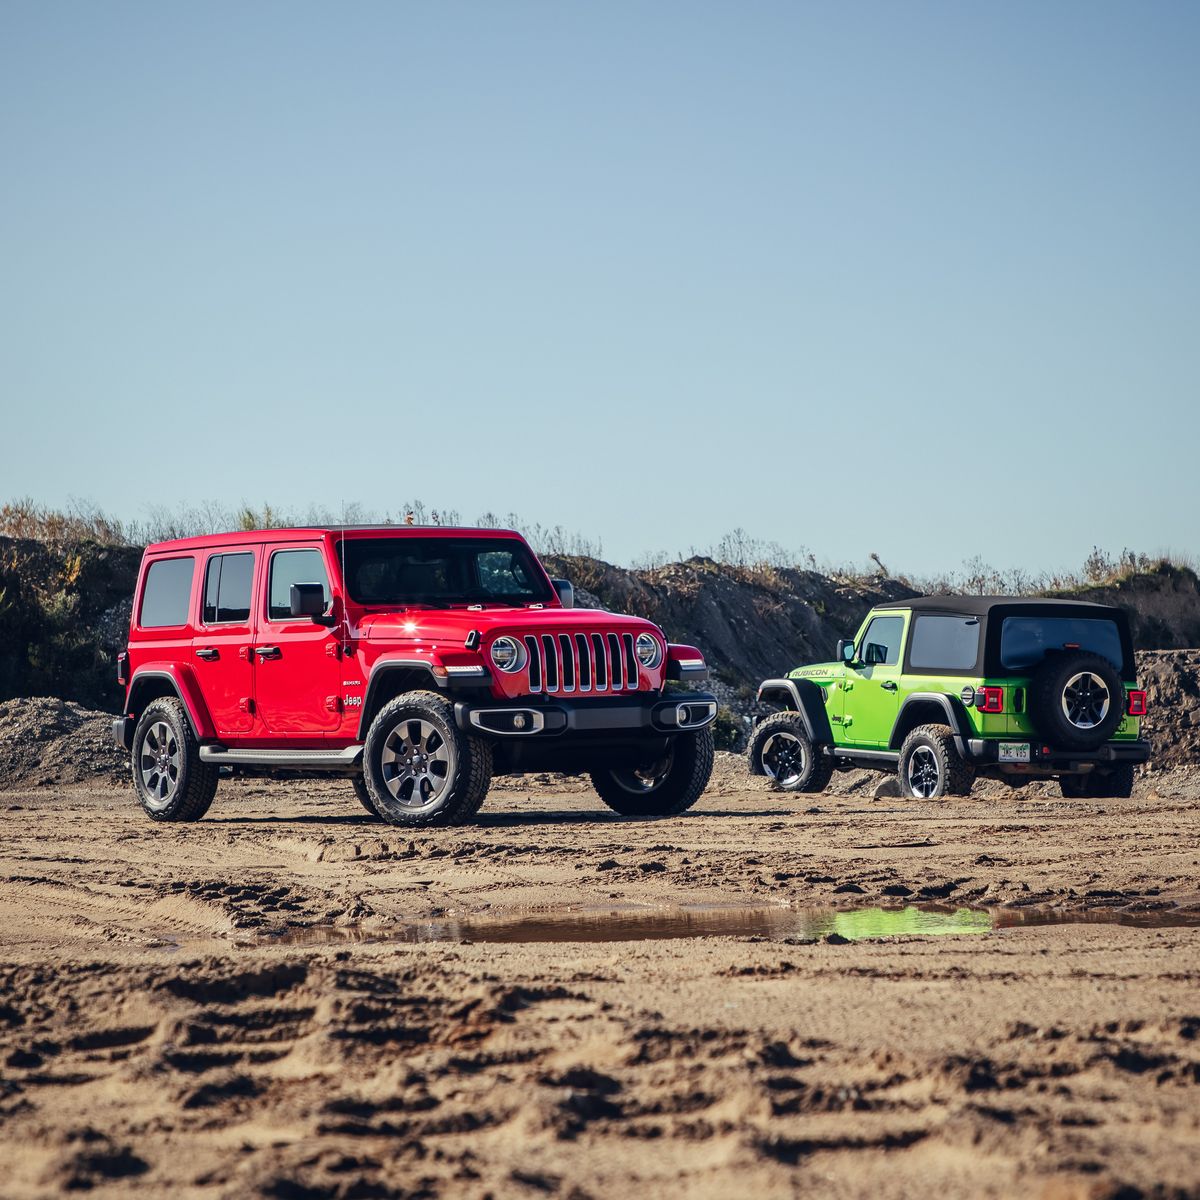 Three New Powertrain Choices for the 2020 Jeep Wrangler